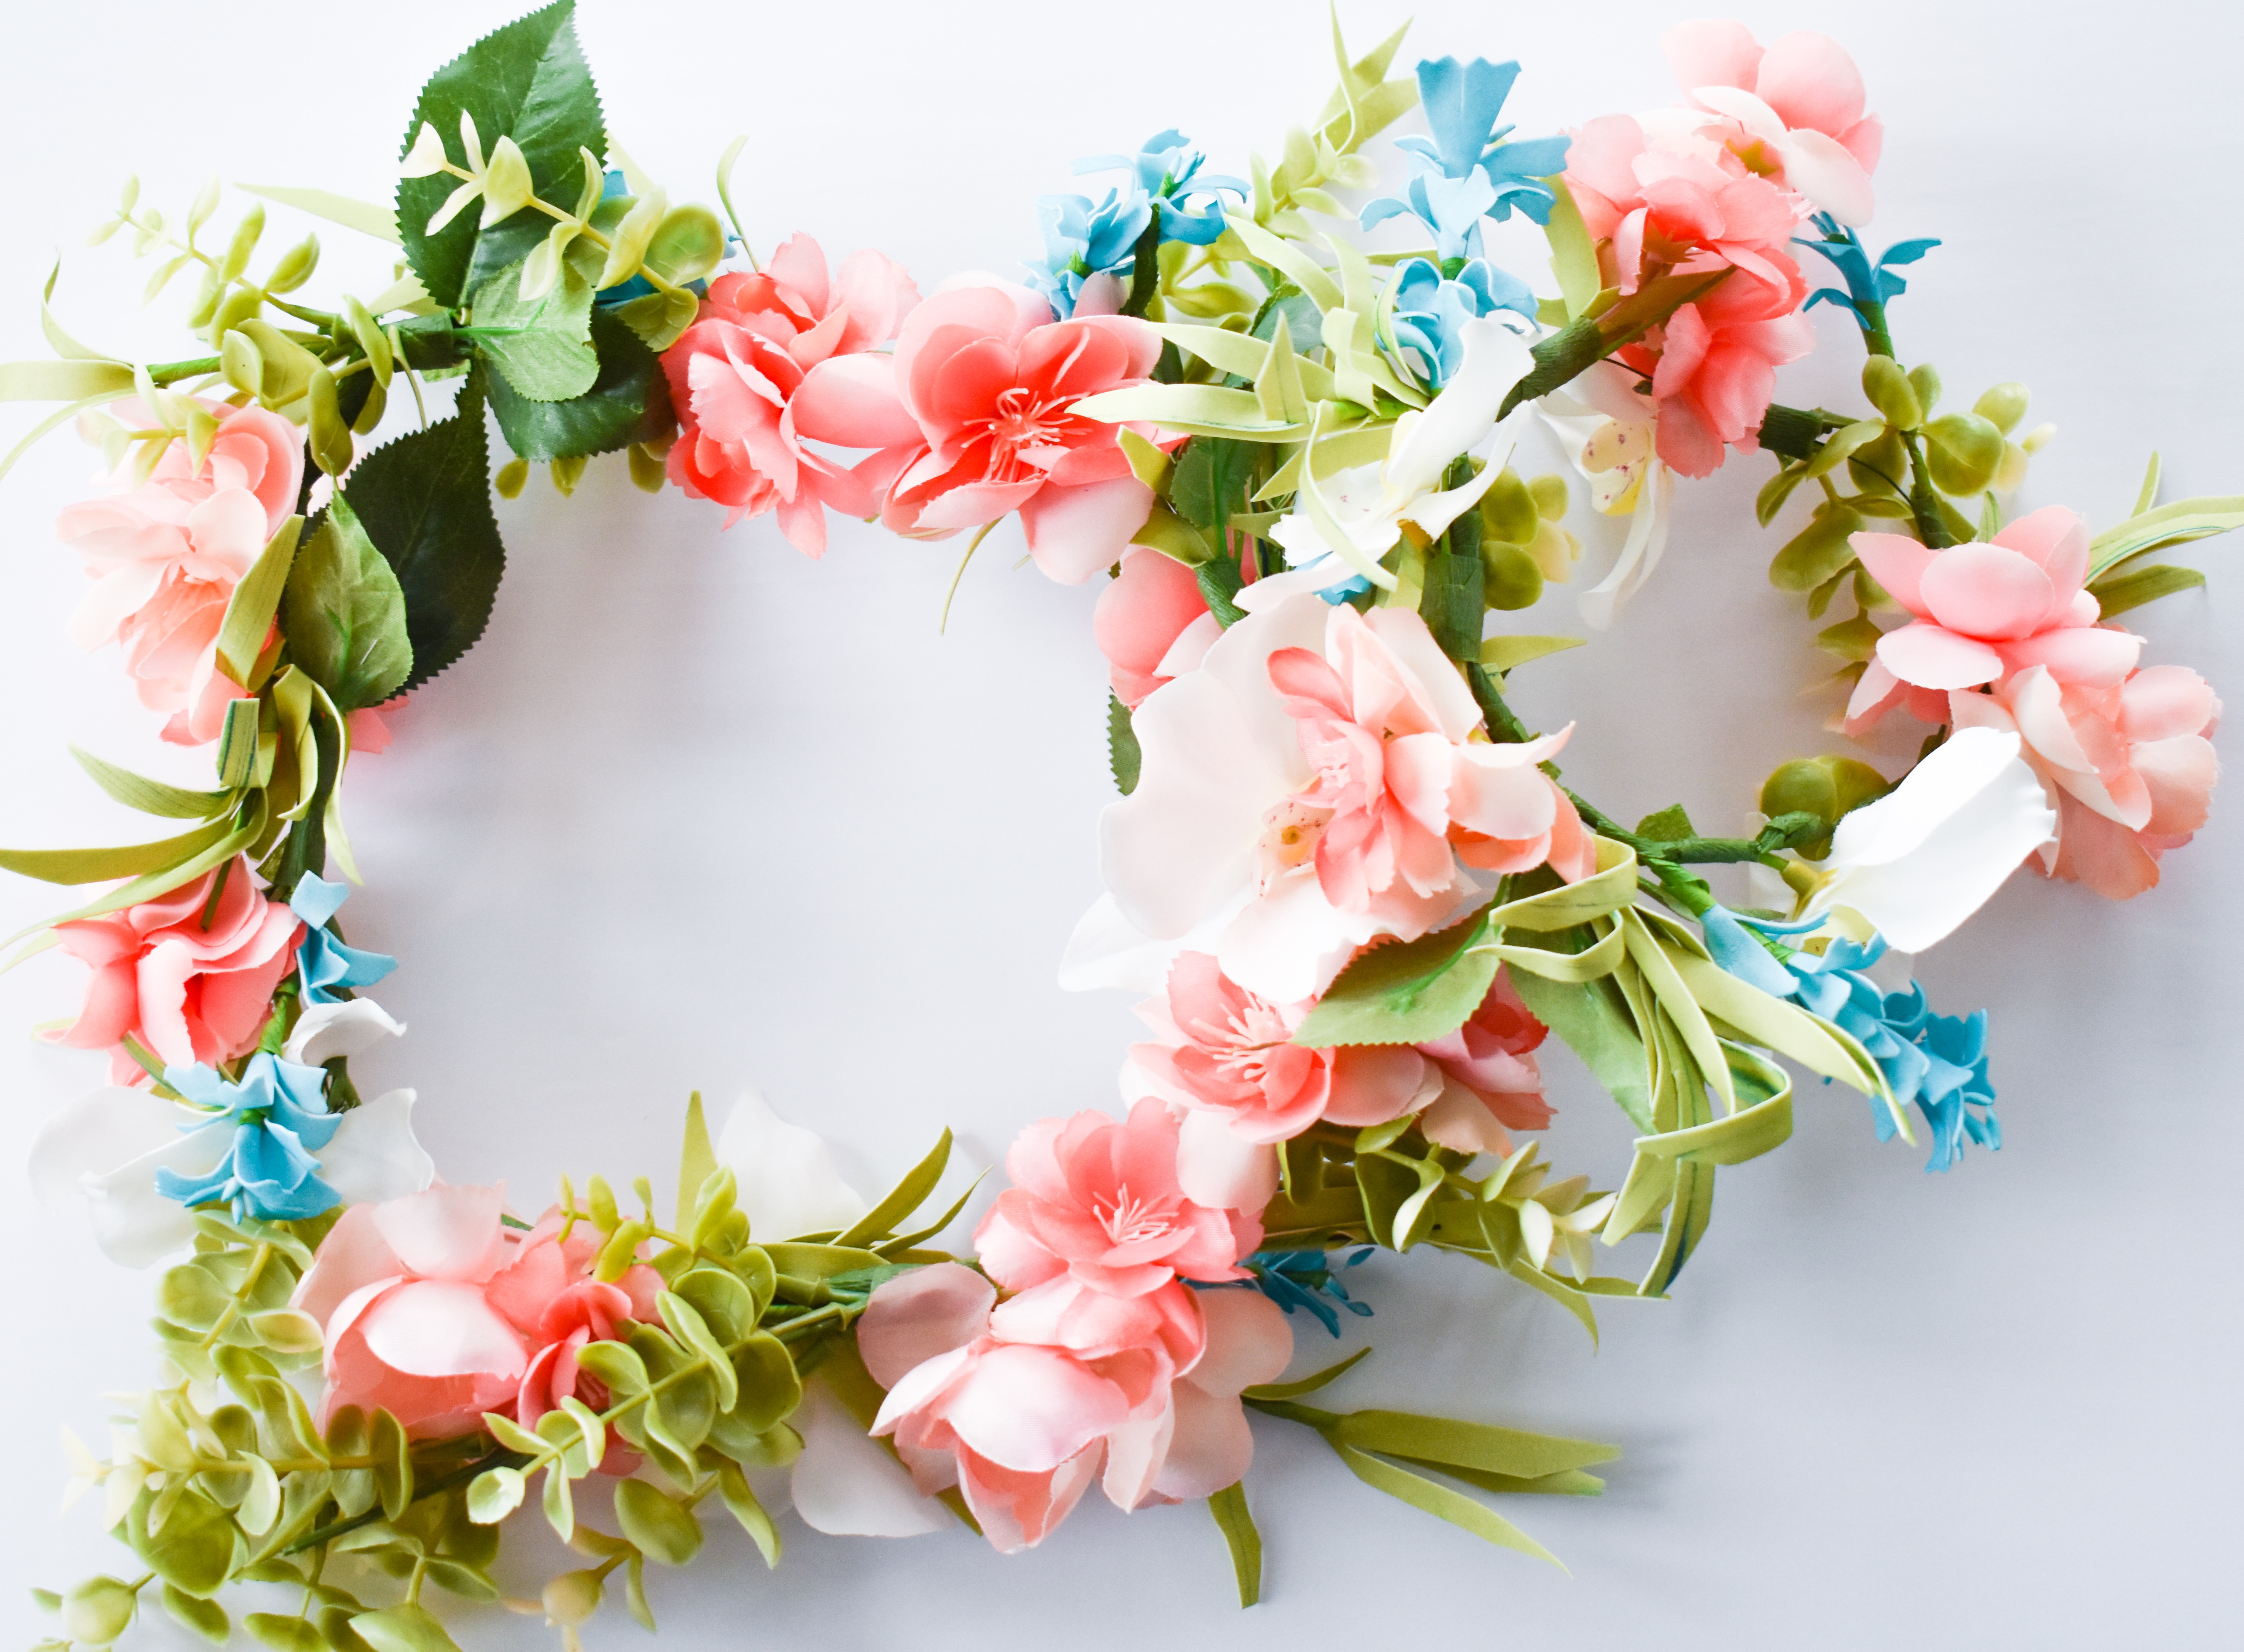 How to Make a Flower Crown with Fake Flowers